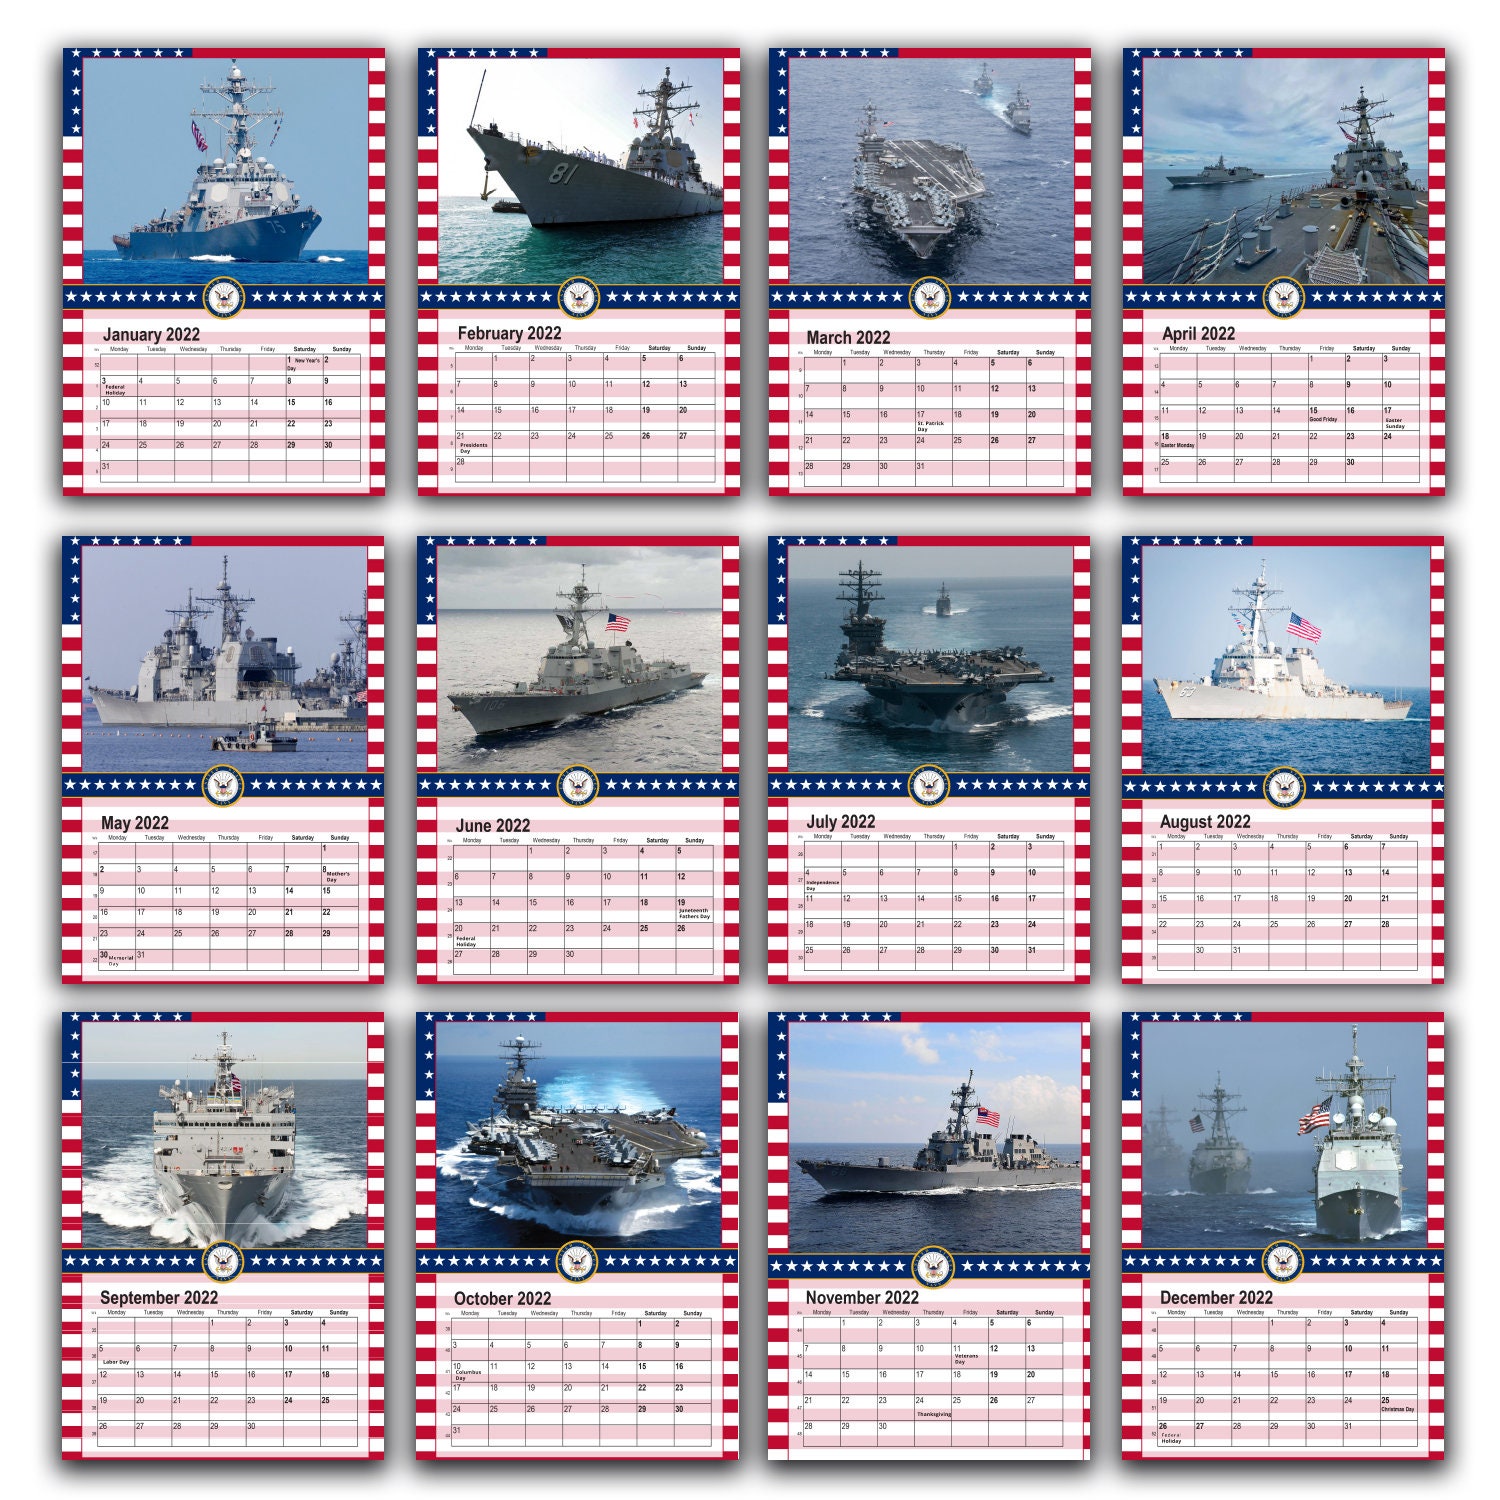 US Navy Warships & Aircraft Carriers Calendar 2022/23 Etsy